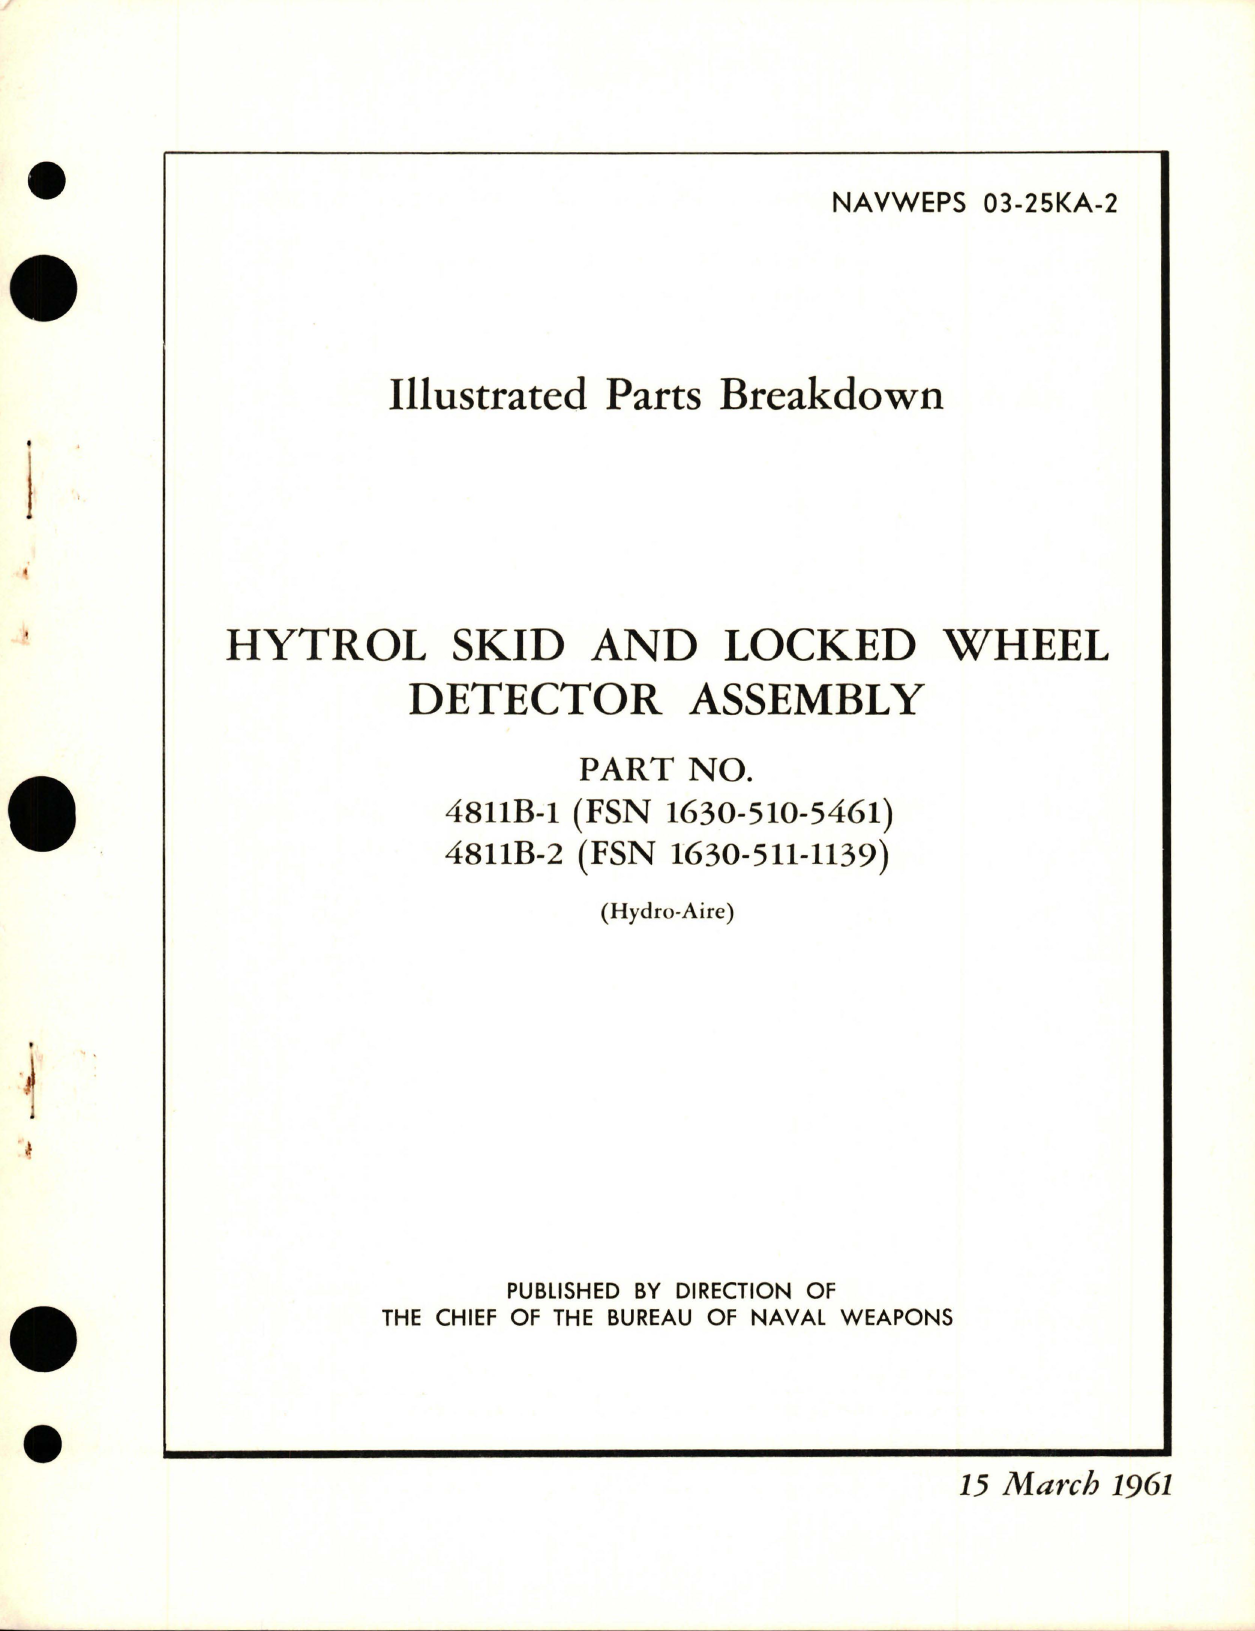 Sample page 1 from AirCorps Library document: Illustrated Parts Breakdown for Hytrol Skid and Locked Wheel Detector Assembly - Parts 4811B-1 and 4811B-2